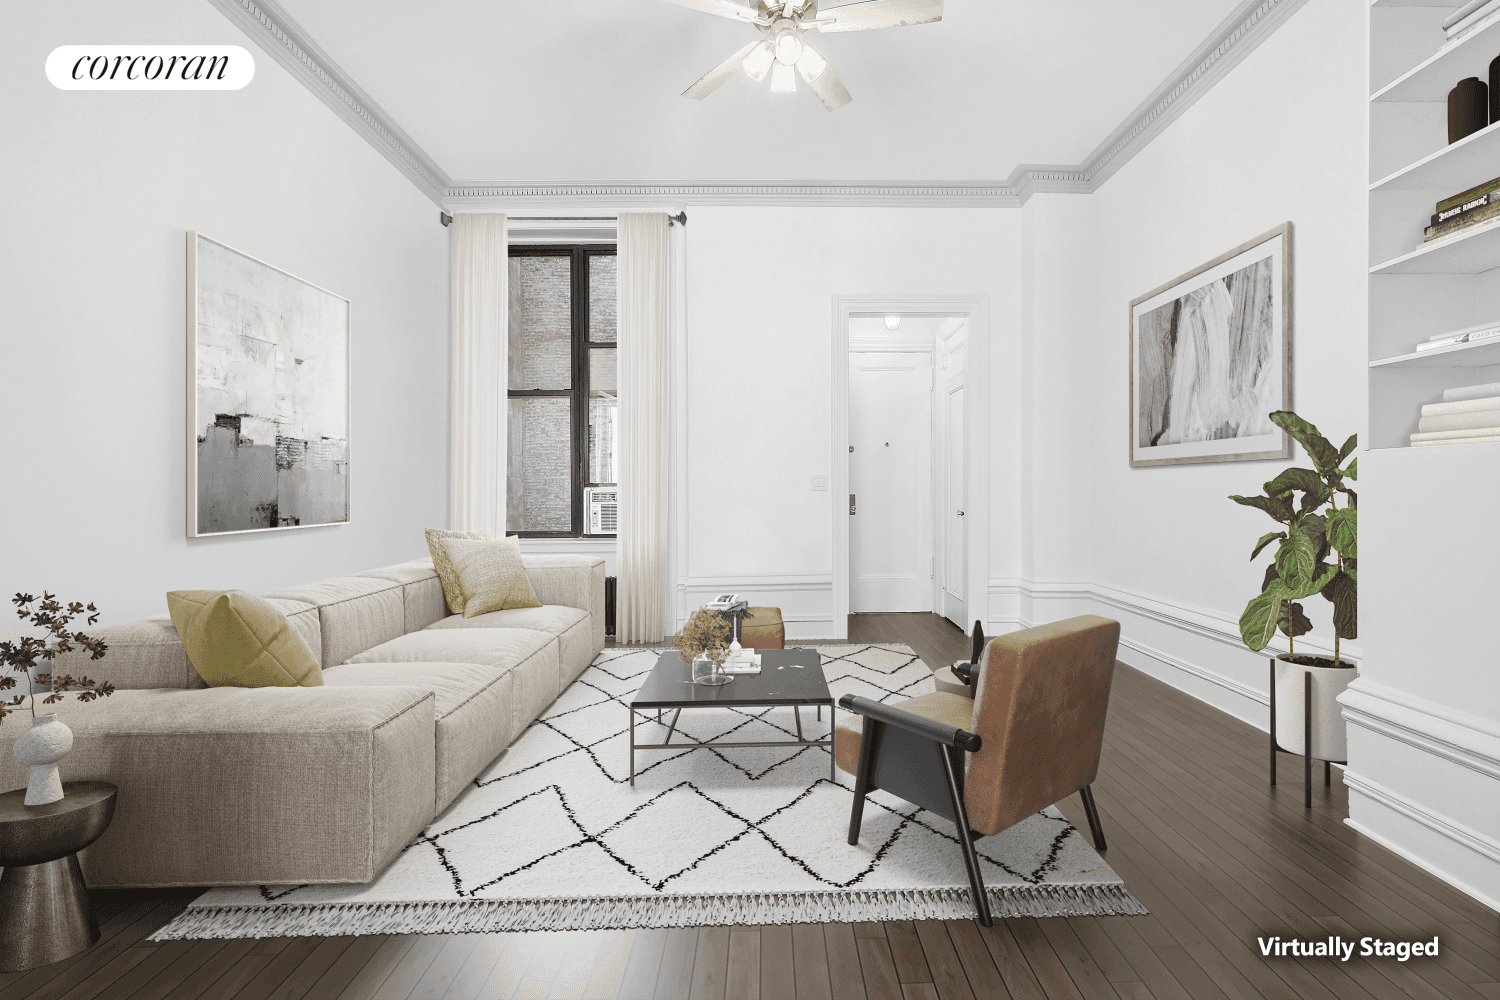 Luxury living welcomes you in the heart of the Upper Westside.